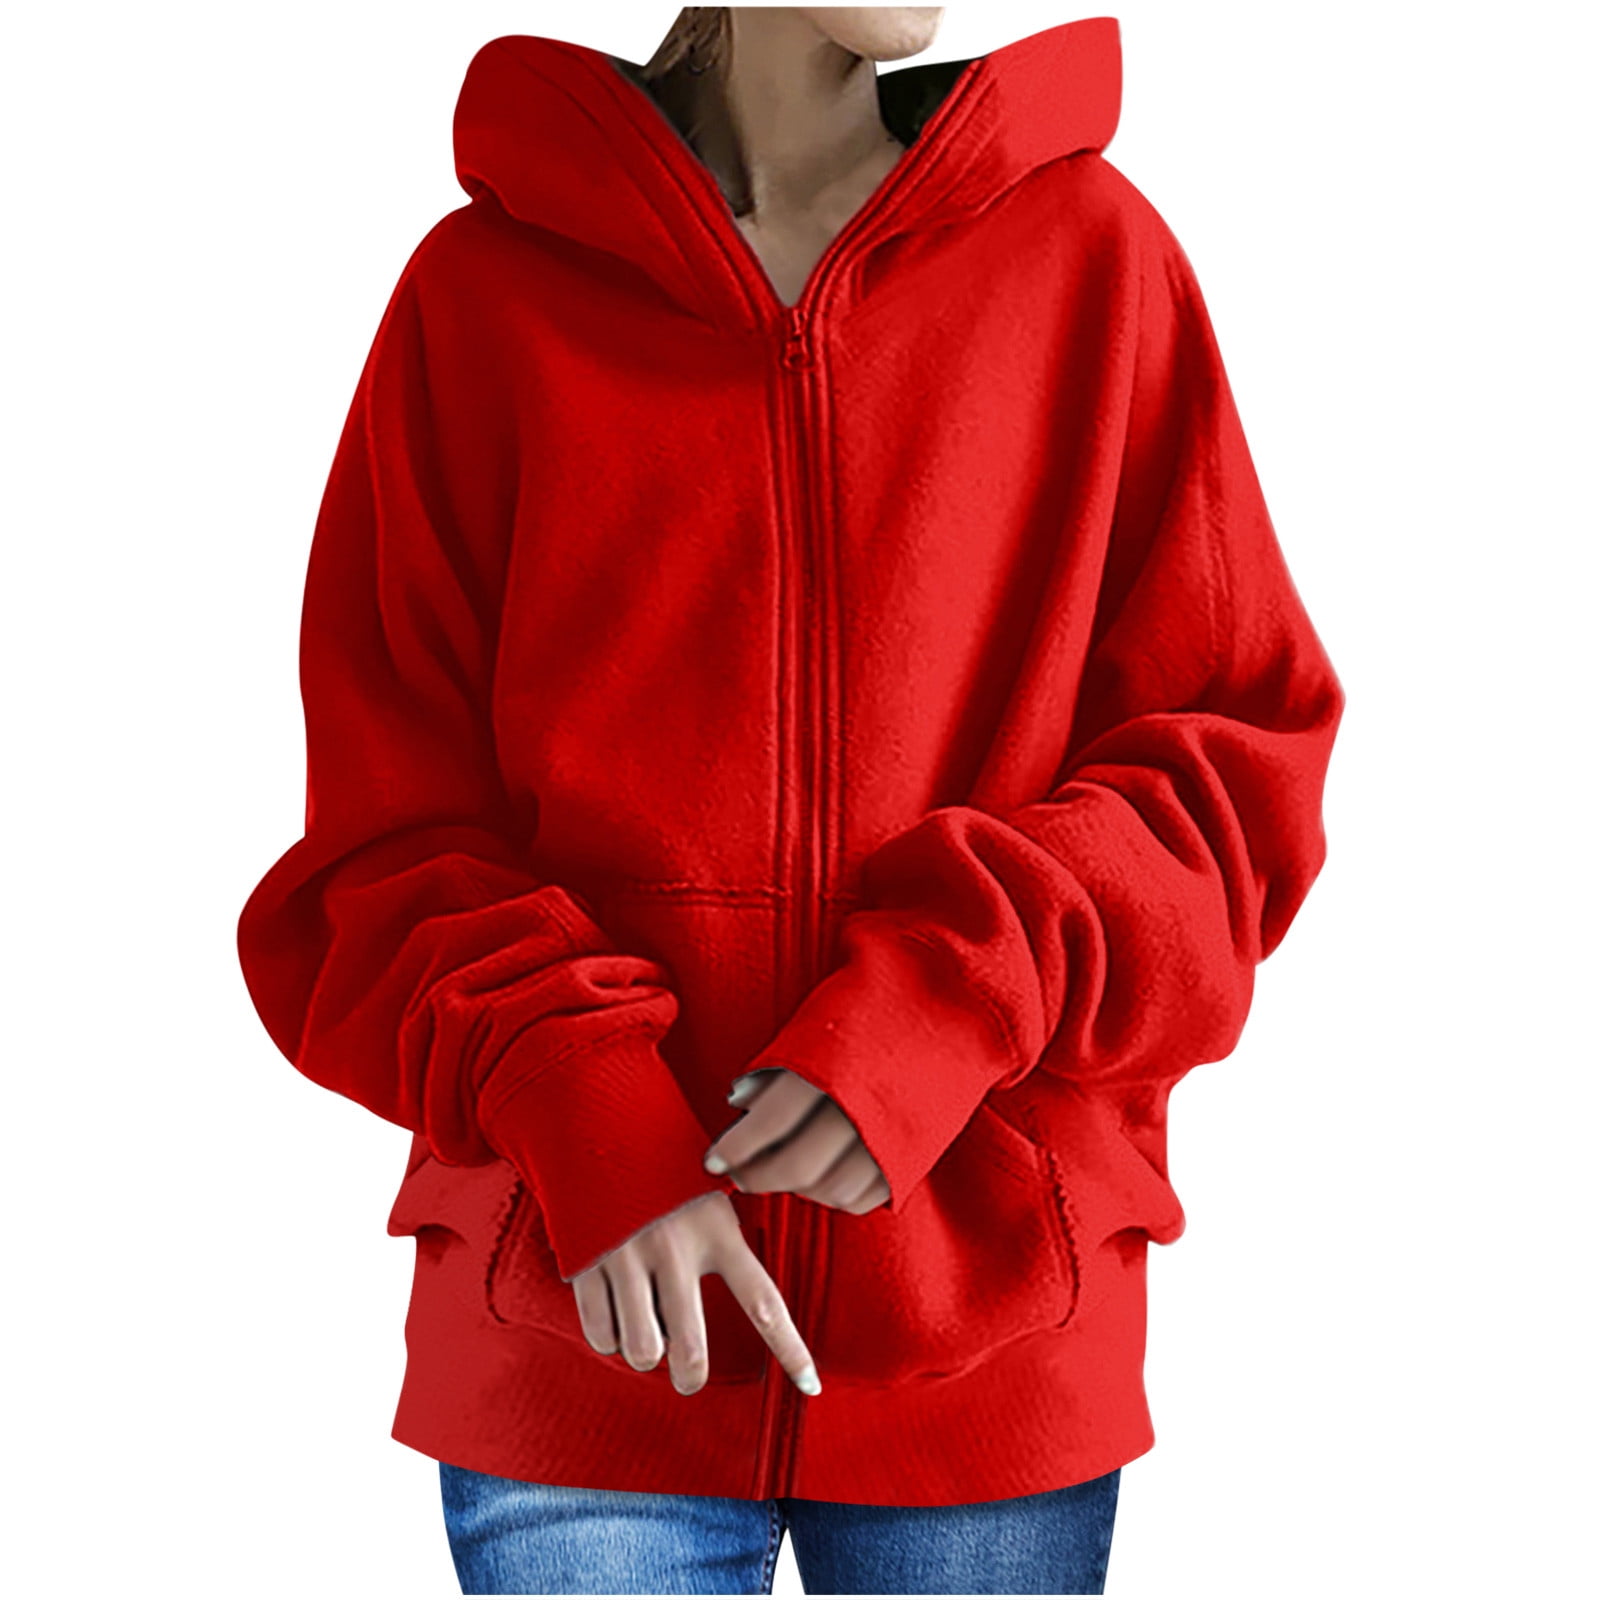 AKSODJF Oversized hoodies for women,wish list,blouses for women  clearance,womens plus size capris sale,2 dollar items only,same day  delivery swimsuits